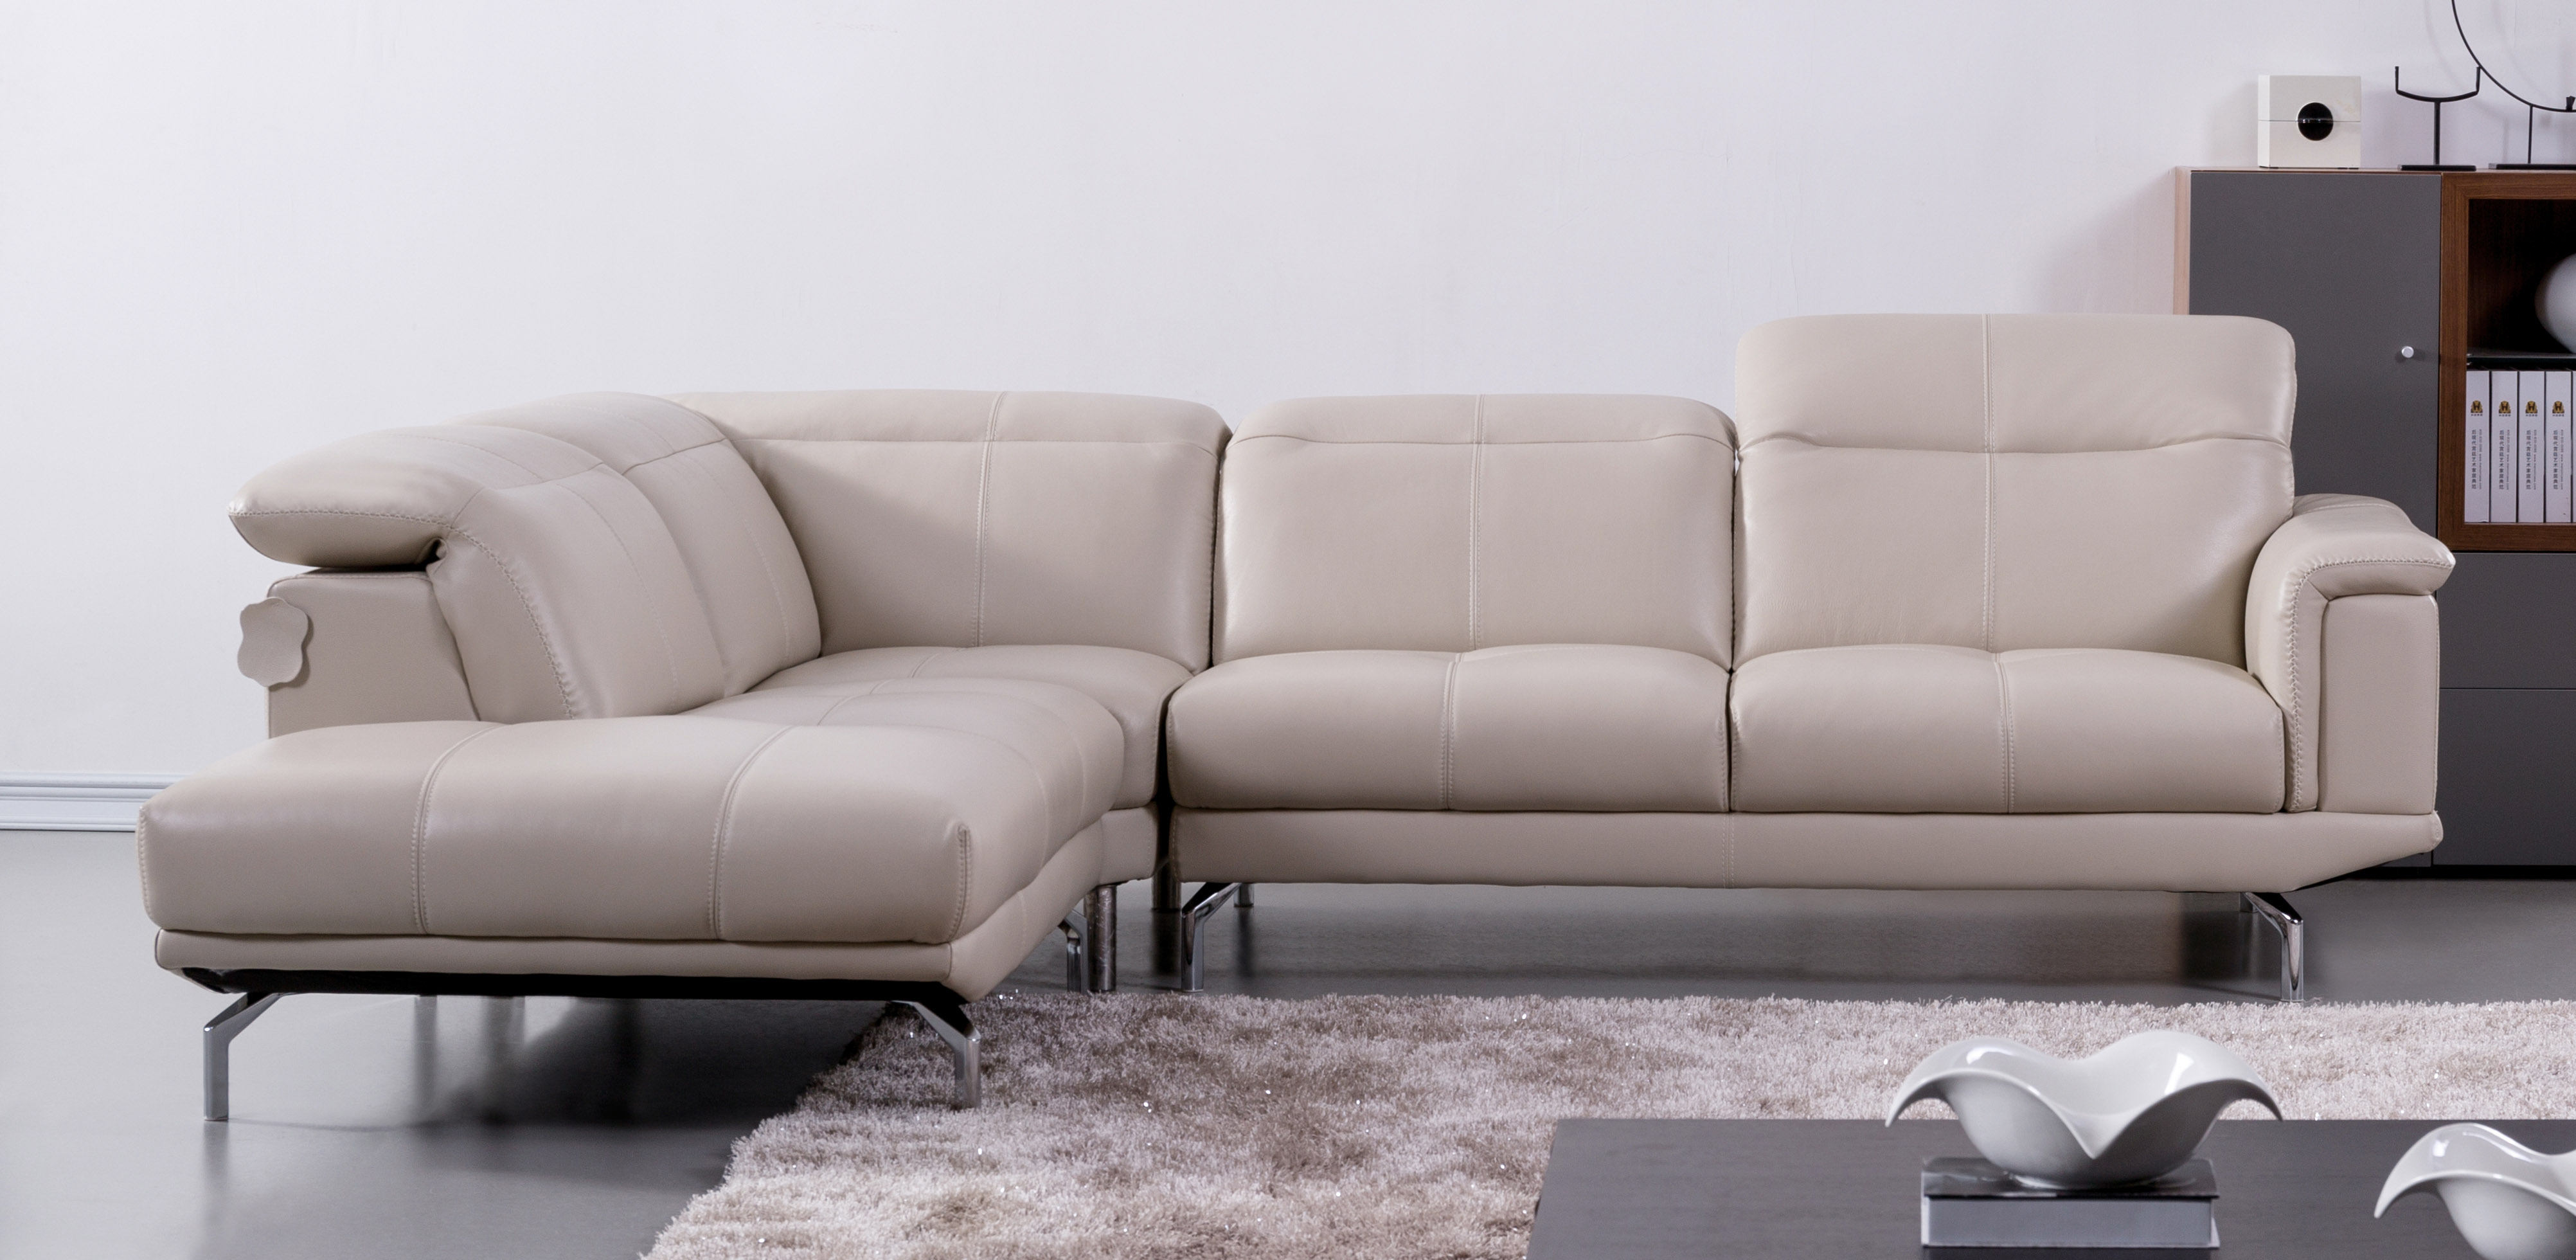 Elegant Beige Leather Sectional Sofa with Soft Appearance - Click Image to Close